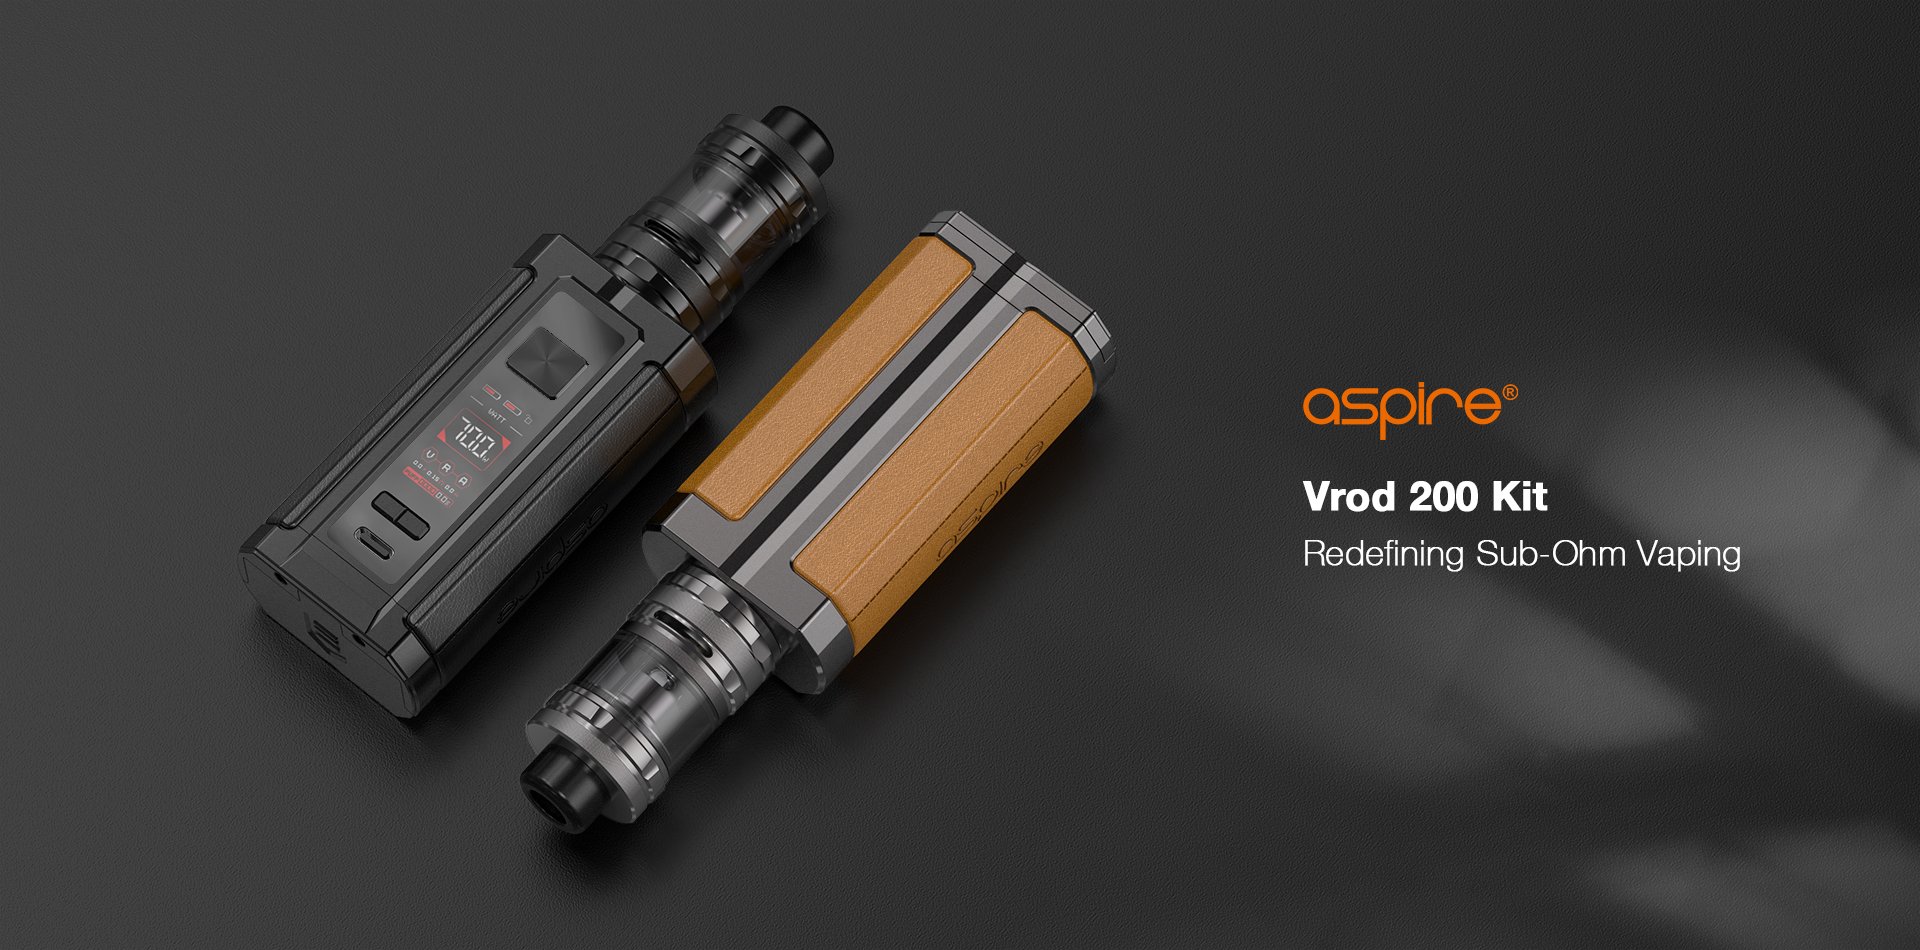 Aspire Vrod Kit Promotional Image - Image displays: 2 Aspire Vrod kits laying down showing both sides of the device - text reads: Aspire Vrod 200 Kit, Redefining Sub-Ohm Vaping